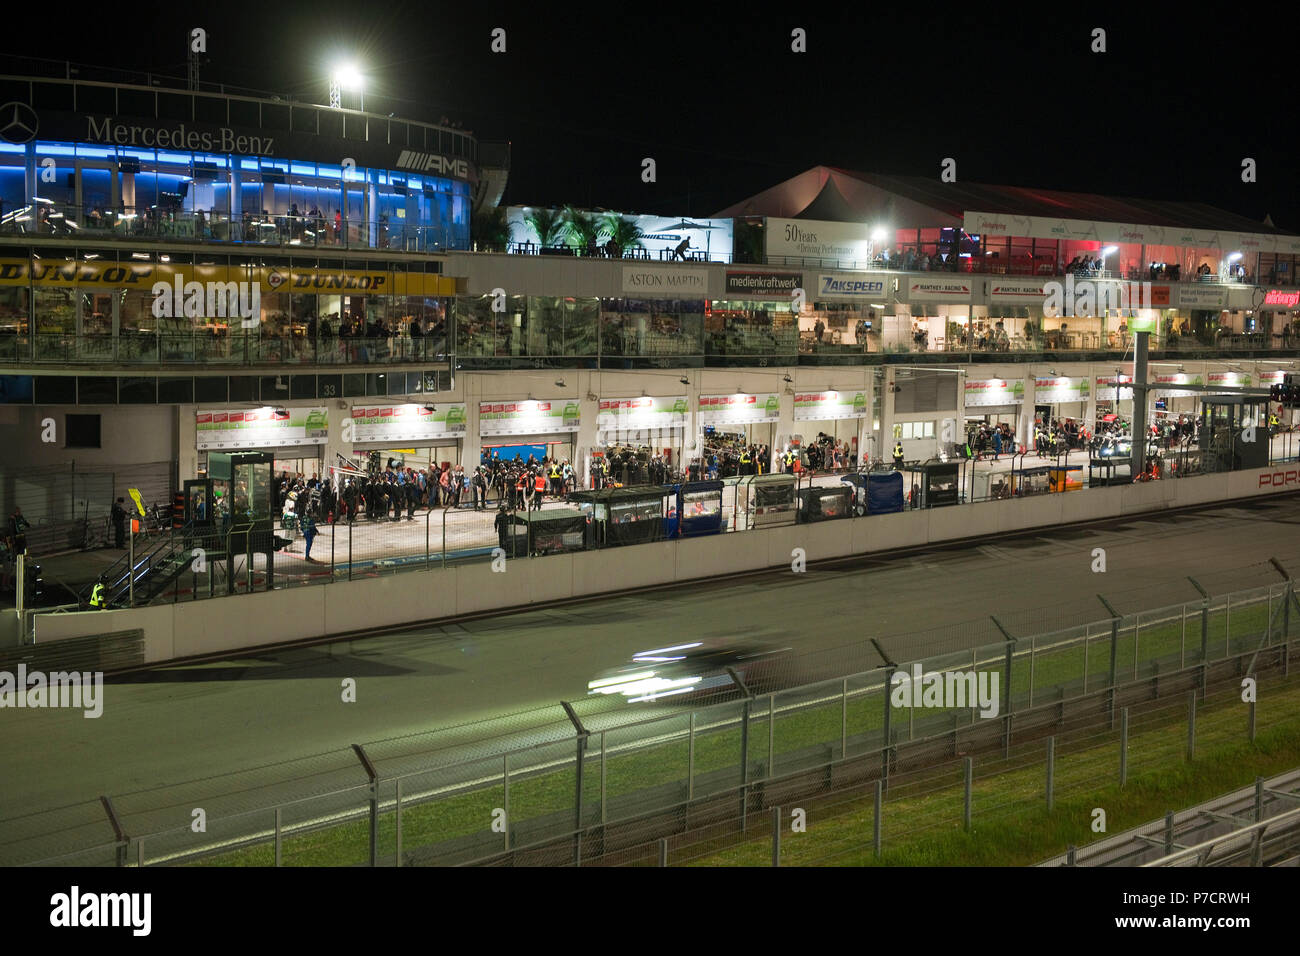 Nuerburgring, race track at night, grandstand with spectators, race cars, racing, night view, Eifel, Rhineland-Palatine, Germany, Europe Stock Photo